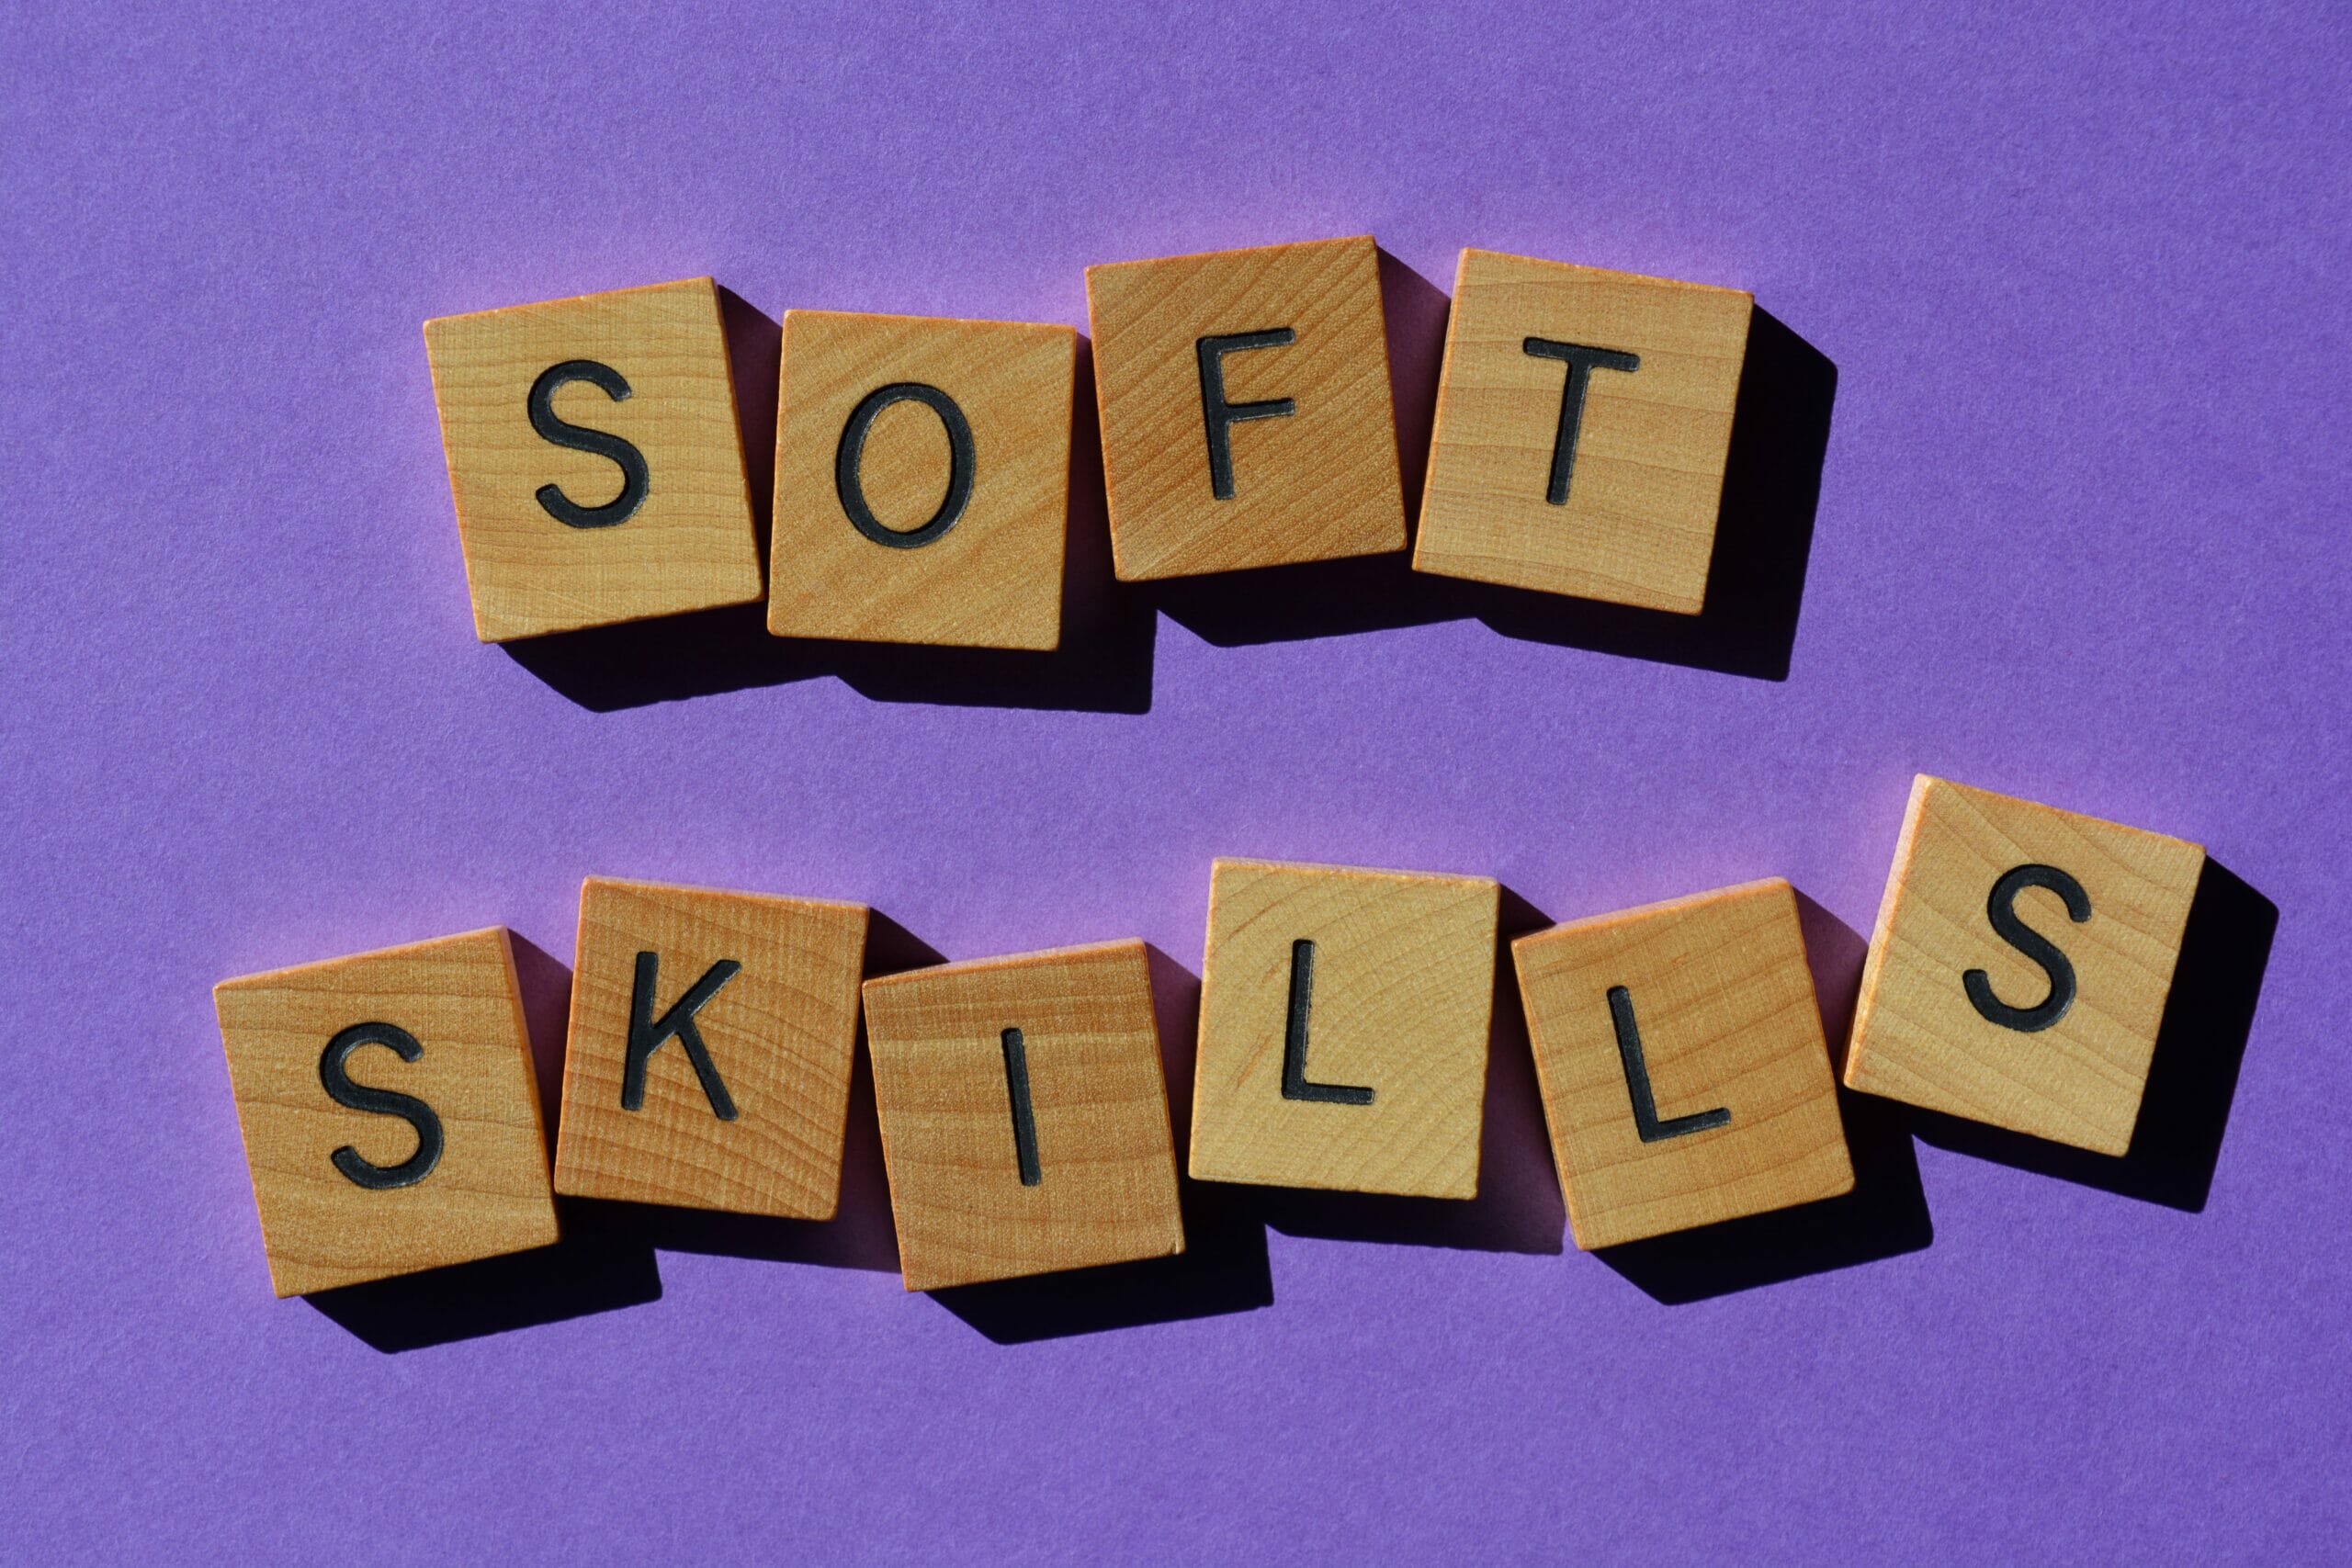 how-gamification-techniques-can-help-evaluate-candidates-soft-skills-in-a-fun-and-engaging-way-min